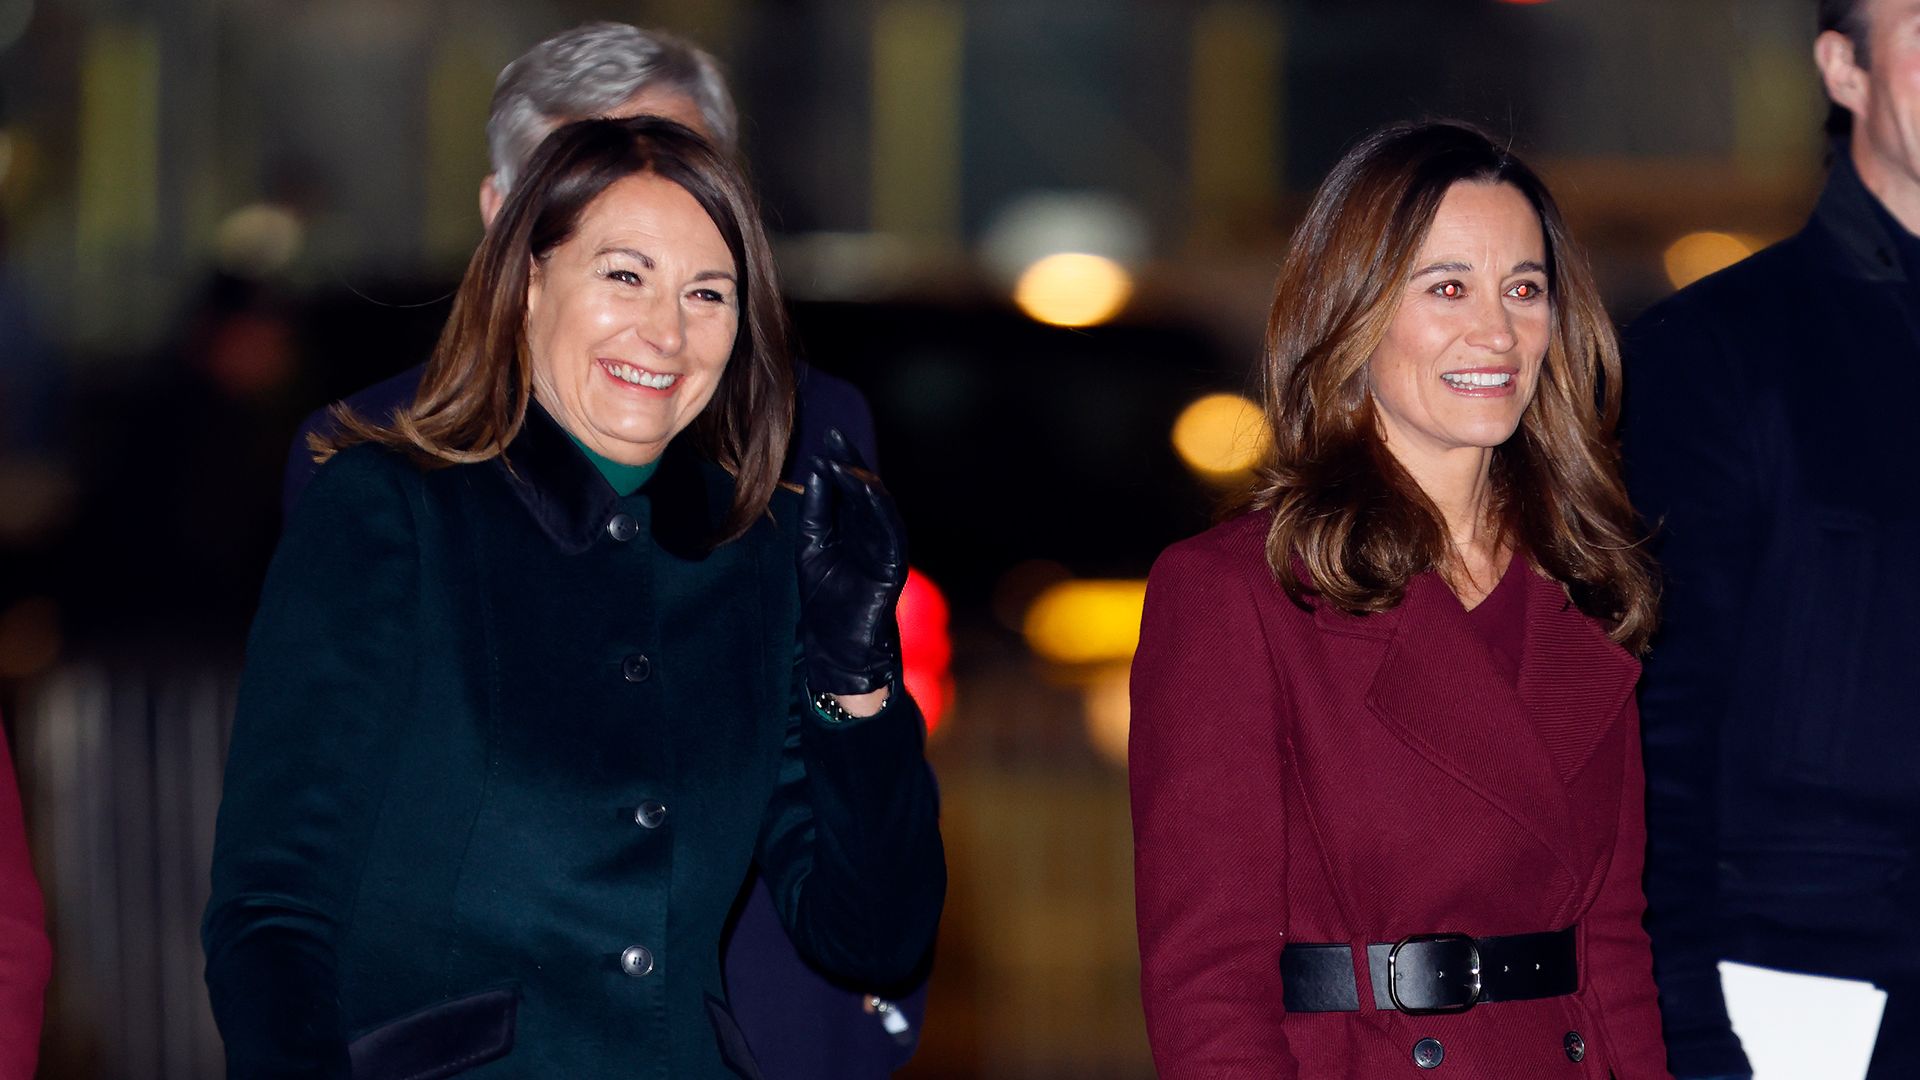 Carole and Pippa Middleton's best mother-daughter moments